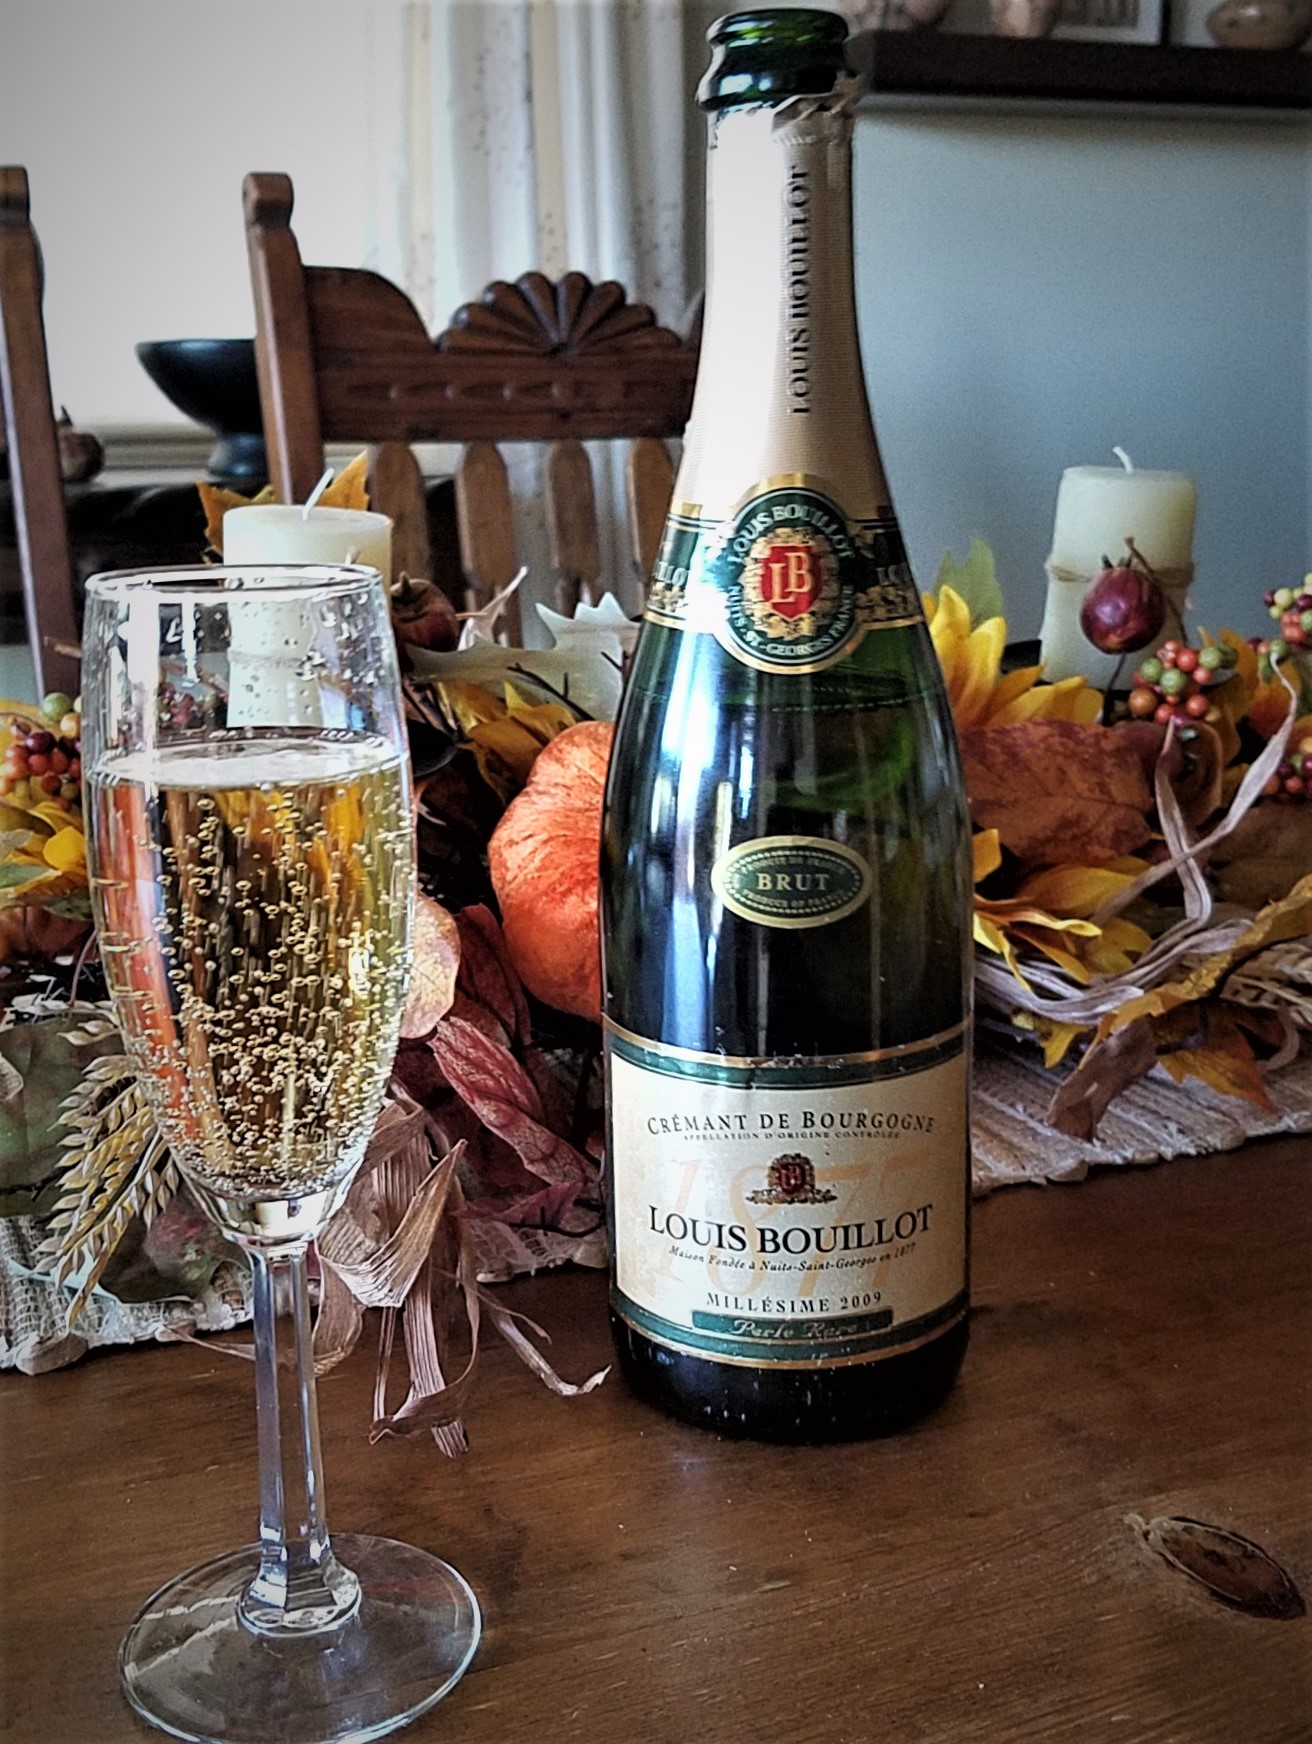 Sparkling wines like this Cremant from Burgundy are staples for holiday celebrations.